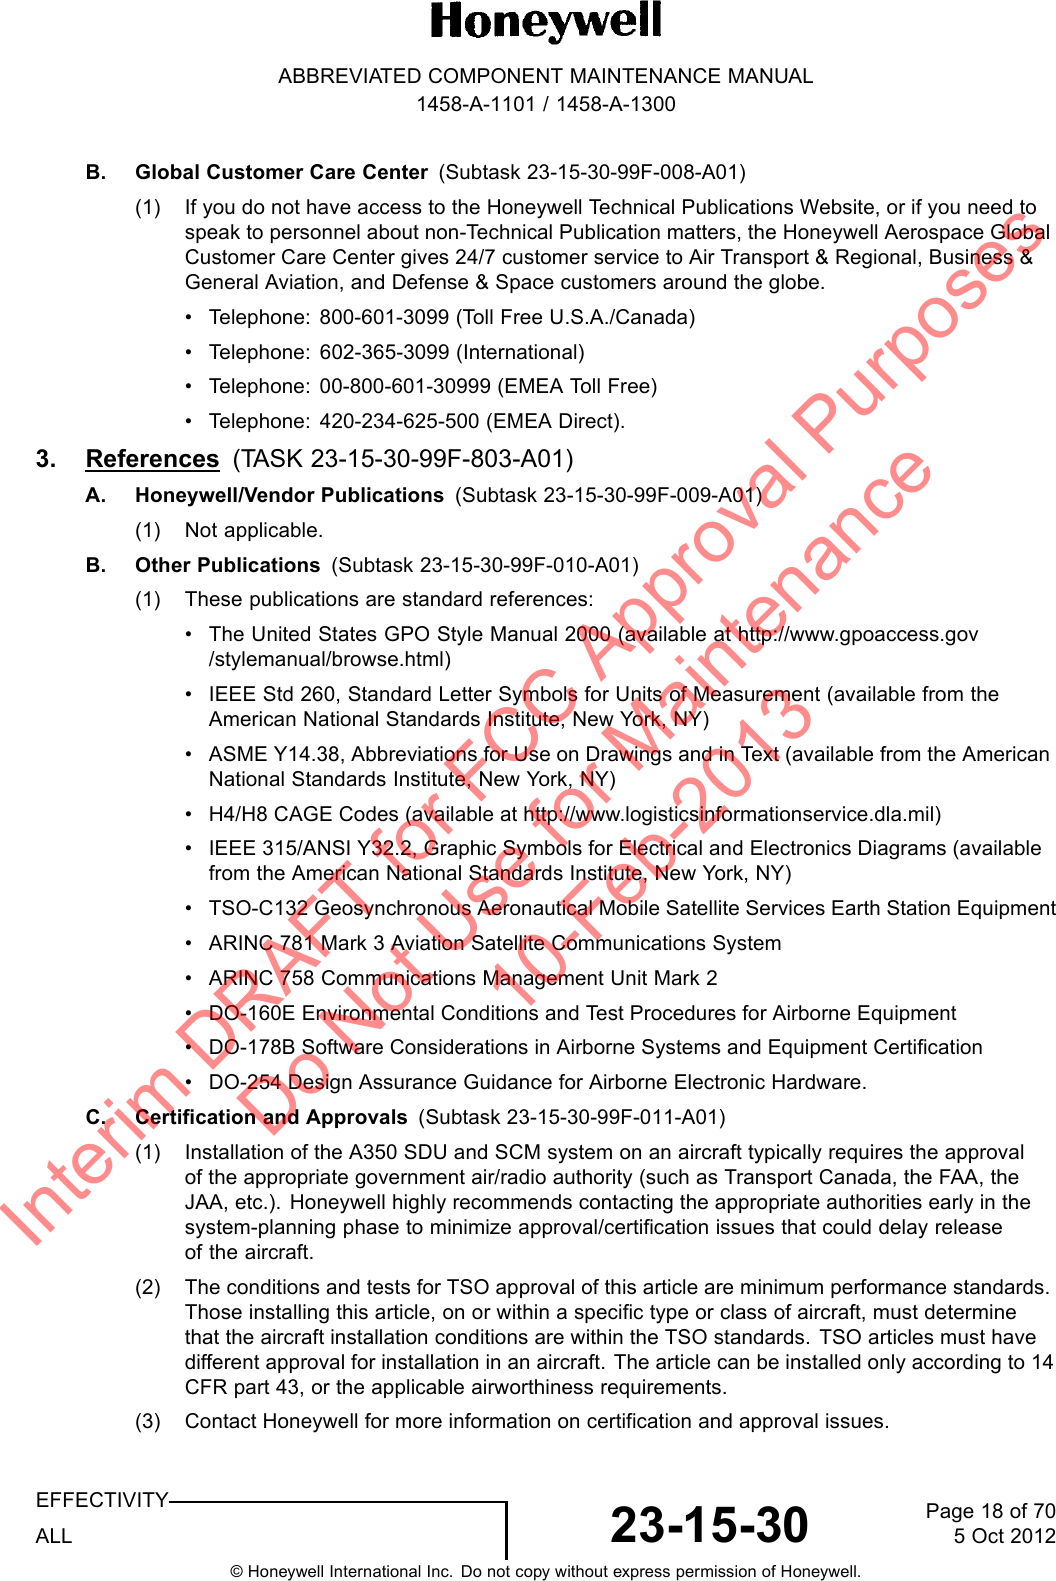 ABBREVIATED COMPONENT MAINTENANCE MANUAL1458-A-1101 / 1458-A-1300B. Global Customer Care Center (Subtask 23-15-30-99F-008-A01)(1) If you do not have access to the Honeywell Technical Publications Website, or if you need tospeak to personnel about non-Technical Publication matters, the Honeywell Aerospace GlobalCustomer Care Center gives 24/7 customer service to Air Transport &amp; Regional, Business &amp;General Aviation, and Defense &amp; Space customers around the globe.• Telephone: 800-601-3099 (Toll Free U.S.A./Canada)• Telephone: 602-365-3099 (International)• Telephone: 00-800-601-30999 (EMEA Toll Free)• Telephone: 420-234-625-500 (EMEA Direct).3. References (TASK 23-15-30-99F-803-A01)A. Honeywell/Vendor Publications (Subtask 23-15-30-99F-009-A01)(1) Not applicable.B. Other Publications (Subtask 23-15-30-99F-010-A01)(1) These publications are standard references:• The United States GPO Style Manual 2000 (available at http://www.gpoaccess.gov/stylemanual/browse.html)• IEEE Std 260, Standard Letter Symbols for Units of Measurement (available from theAmerican National Standards Institute, New York, NY)• ASME Y14.38, Abbreviations for Use on Drawings and in Text (available from the AmericanNational Standards Institute, New York, NY)• H4/H8 CAGE Codes (available at http://www.logisticsinformationservice.dla.mil)• IEEE 315/ANSI Y32.2, Graphic Symbols for Electrical and Electronics Diagrams (availablefrom the American National Standards Institute, New York, NY)• TSO-C132 Geosynchronous Aeronautical Mobile Satellite Services Earth Station Equipment• ARINC 781 Mark 3 Aviation Satellite Communications System• ARINC 758 Communications Management Unit Mark 2• DO-160E Environmental Conditions and Test Procedures for Airborne Equipment• DO-178B Software Considerations in Airborne Systems and Equipment Certification• DO-254 Design Assurance Guidance for Airborne Electronic Hardware.C. Certification and Approvals (Subtask 23-15-30-99F-011-A01)(1) Installation of the A350 SDU and SCM system on an aircraft typically requires the approvalof the appropriate government air/radio authority (such as Transport Canada, the FAA, theJAA, etc.). Honeywell highly recommends contacting the appropriate authorities early in thesystem-planning phase to minimize approval/certification issues that could delay releaseof the aircraft.(2) The conditions and tests for TSO approval of this article are minimum performance standards.Those installing this article, on or within a specific type or class of aircraft, must determinethat the aircraft installation conditions are within the TSO standards. TSO articles must havedifferent approval for installation in an aircraft. The article can be installed only according to 14CFR part 43, or the applicable airworthiness requirements.(3) Contact Honeywell for more information on certification and approval issues.EFFECTIVITYALL 23-15-30 Page 18 of 705 Oct 2012© Honeywell International Inc. Do not copy without express permission of Honeywell.Interim DRAFT for FCC Approval Purposes Do Not Use for Maintenance 10-Feb-2013